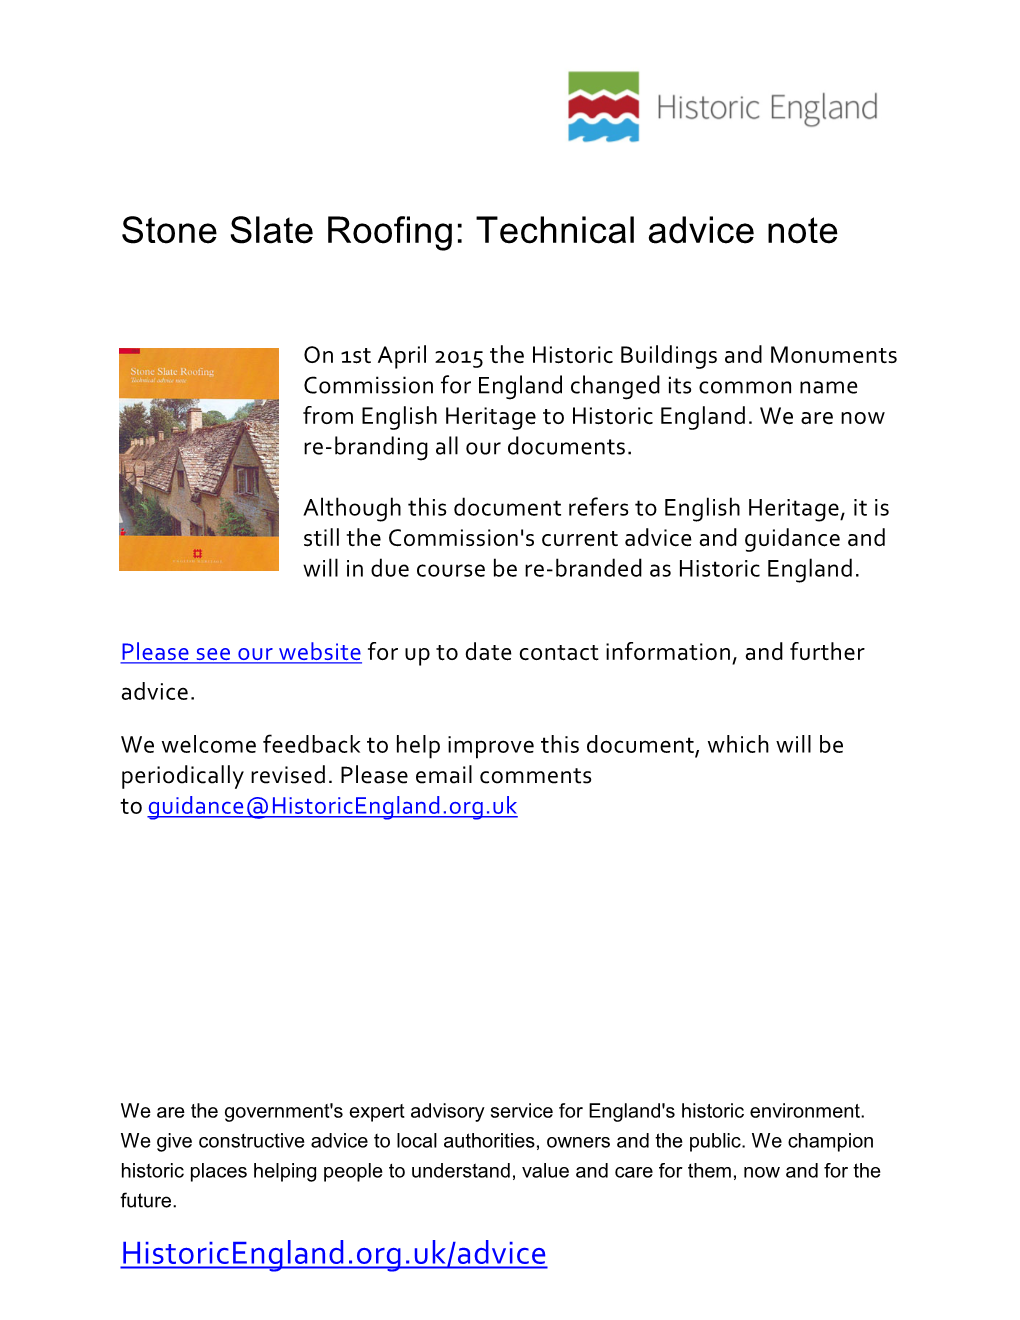 Stone Slate Roofing: Technical Advice Note